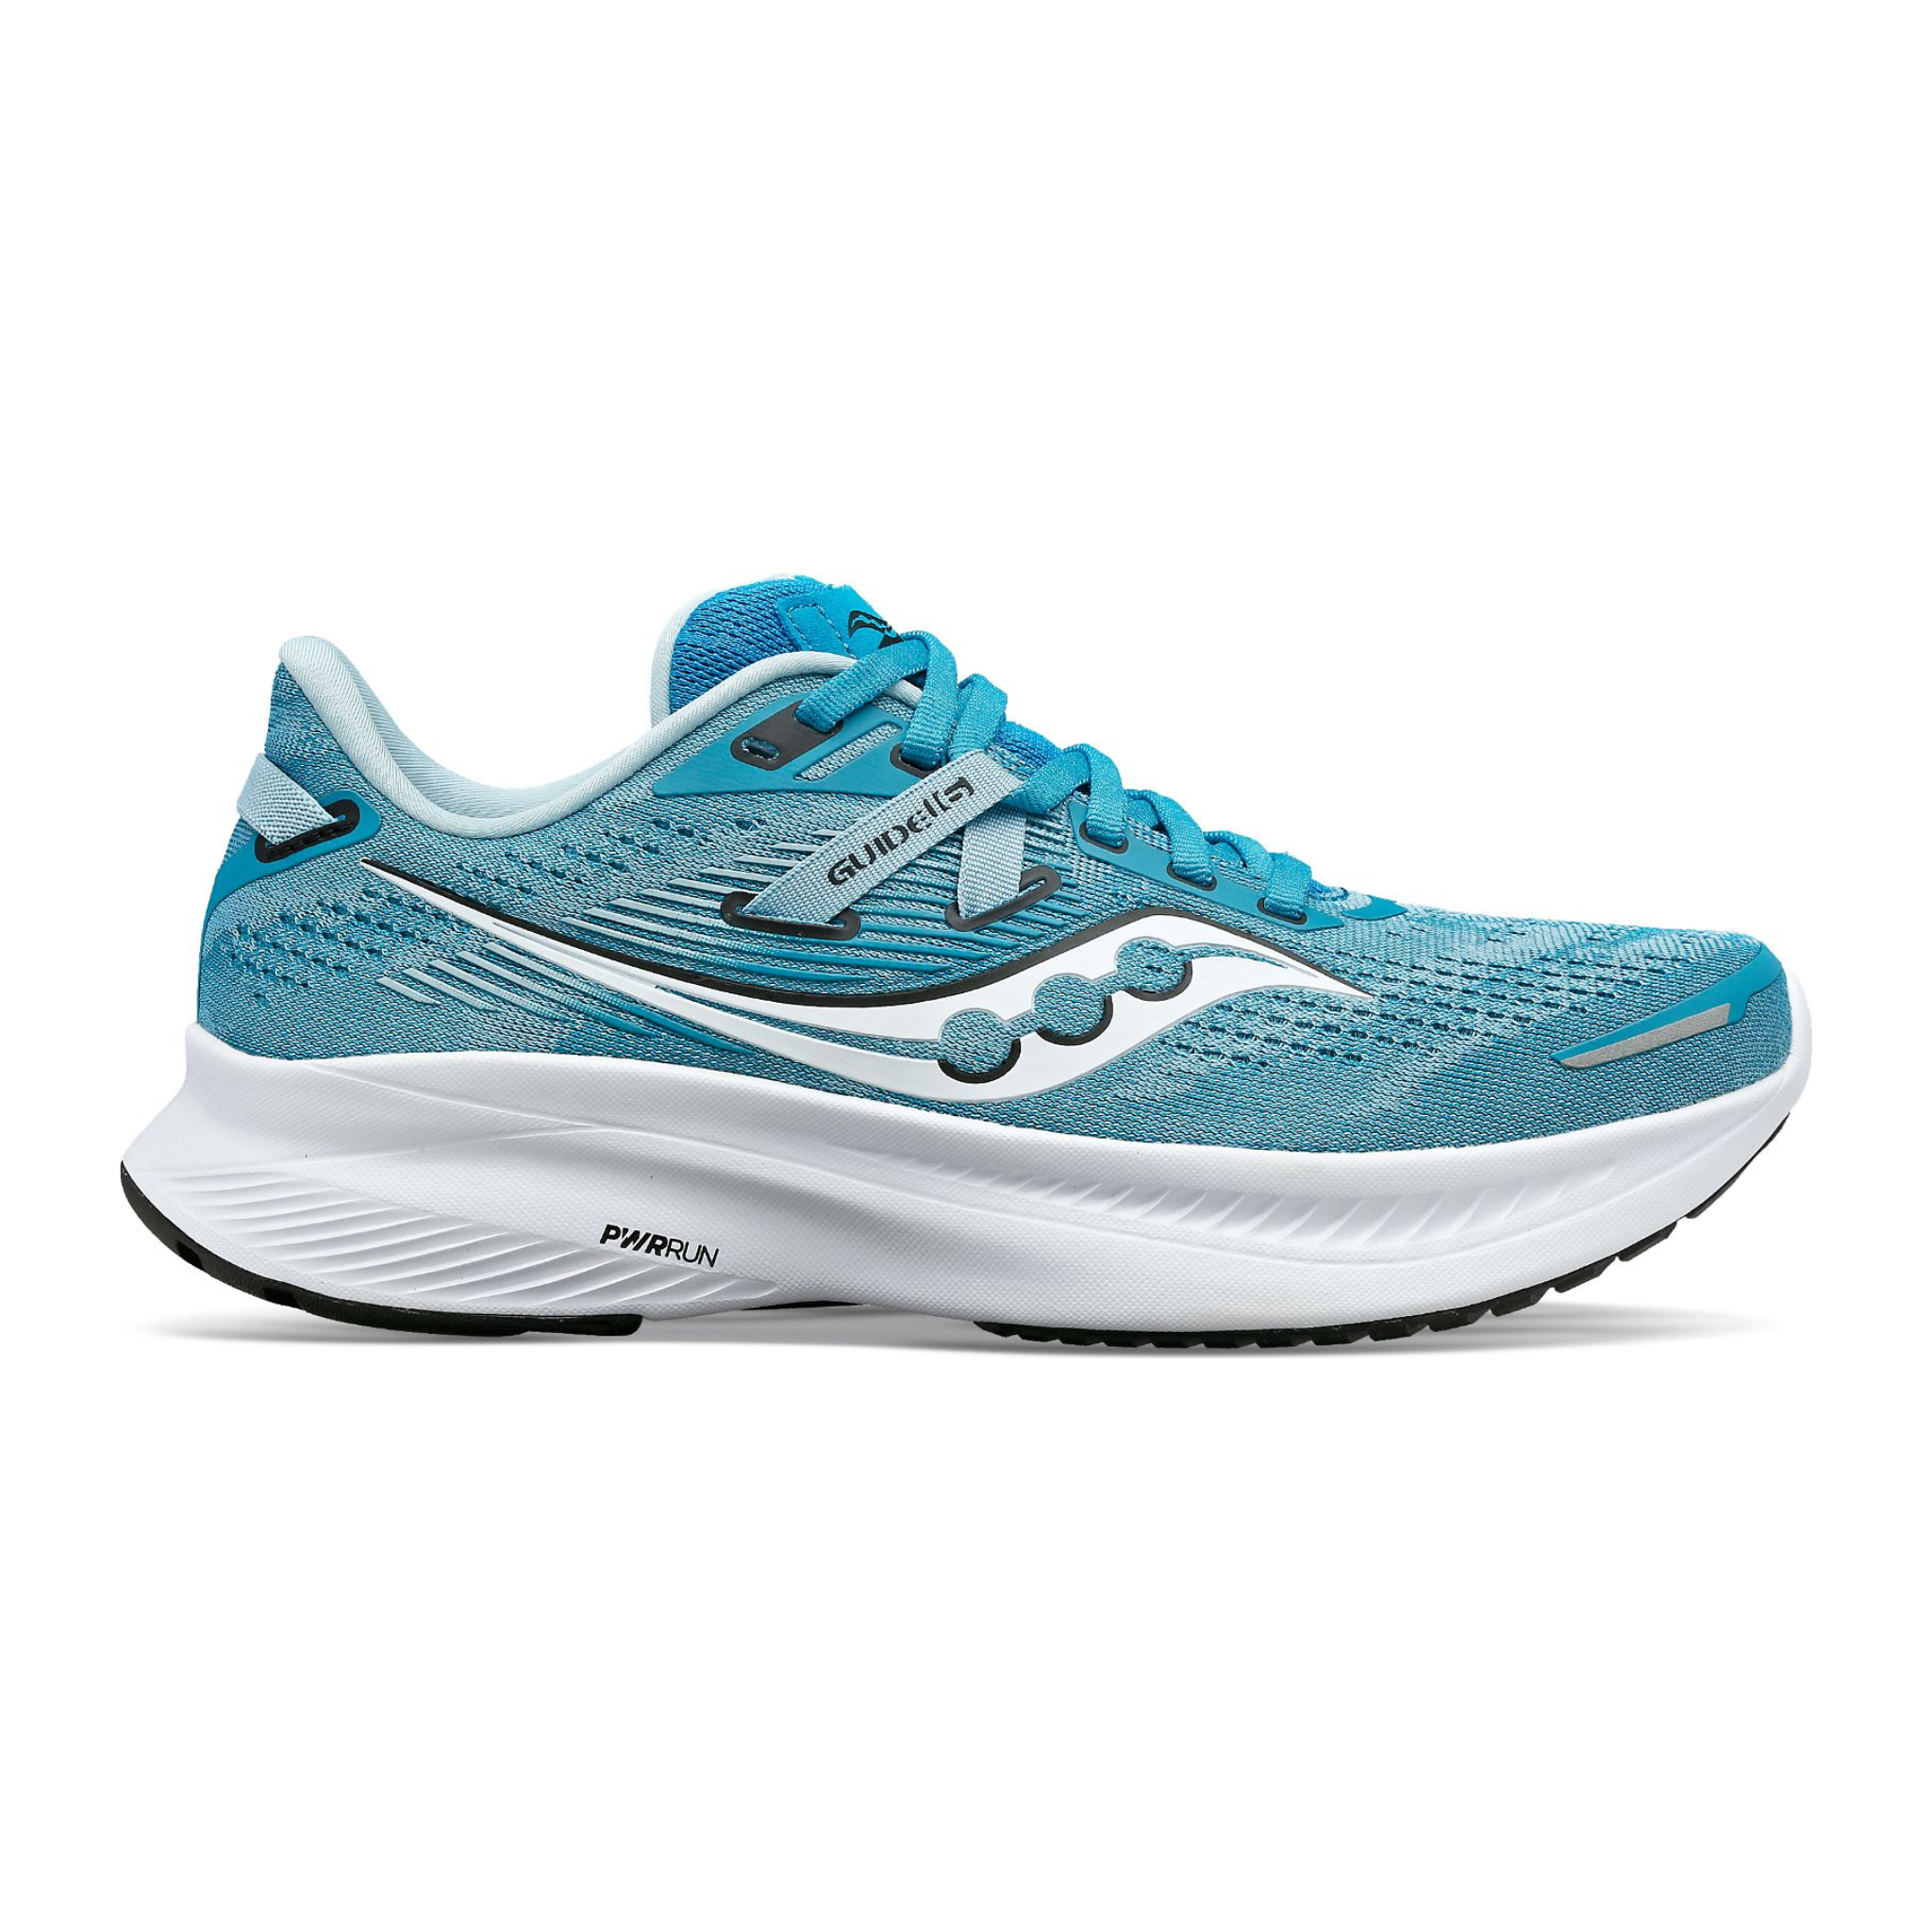 SAUCONY WOMEN'S GUIDE 16 - B - 23 INK/WHITE 5.0